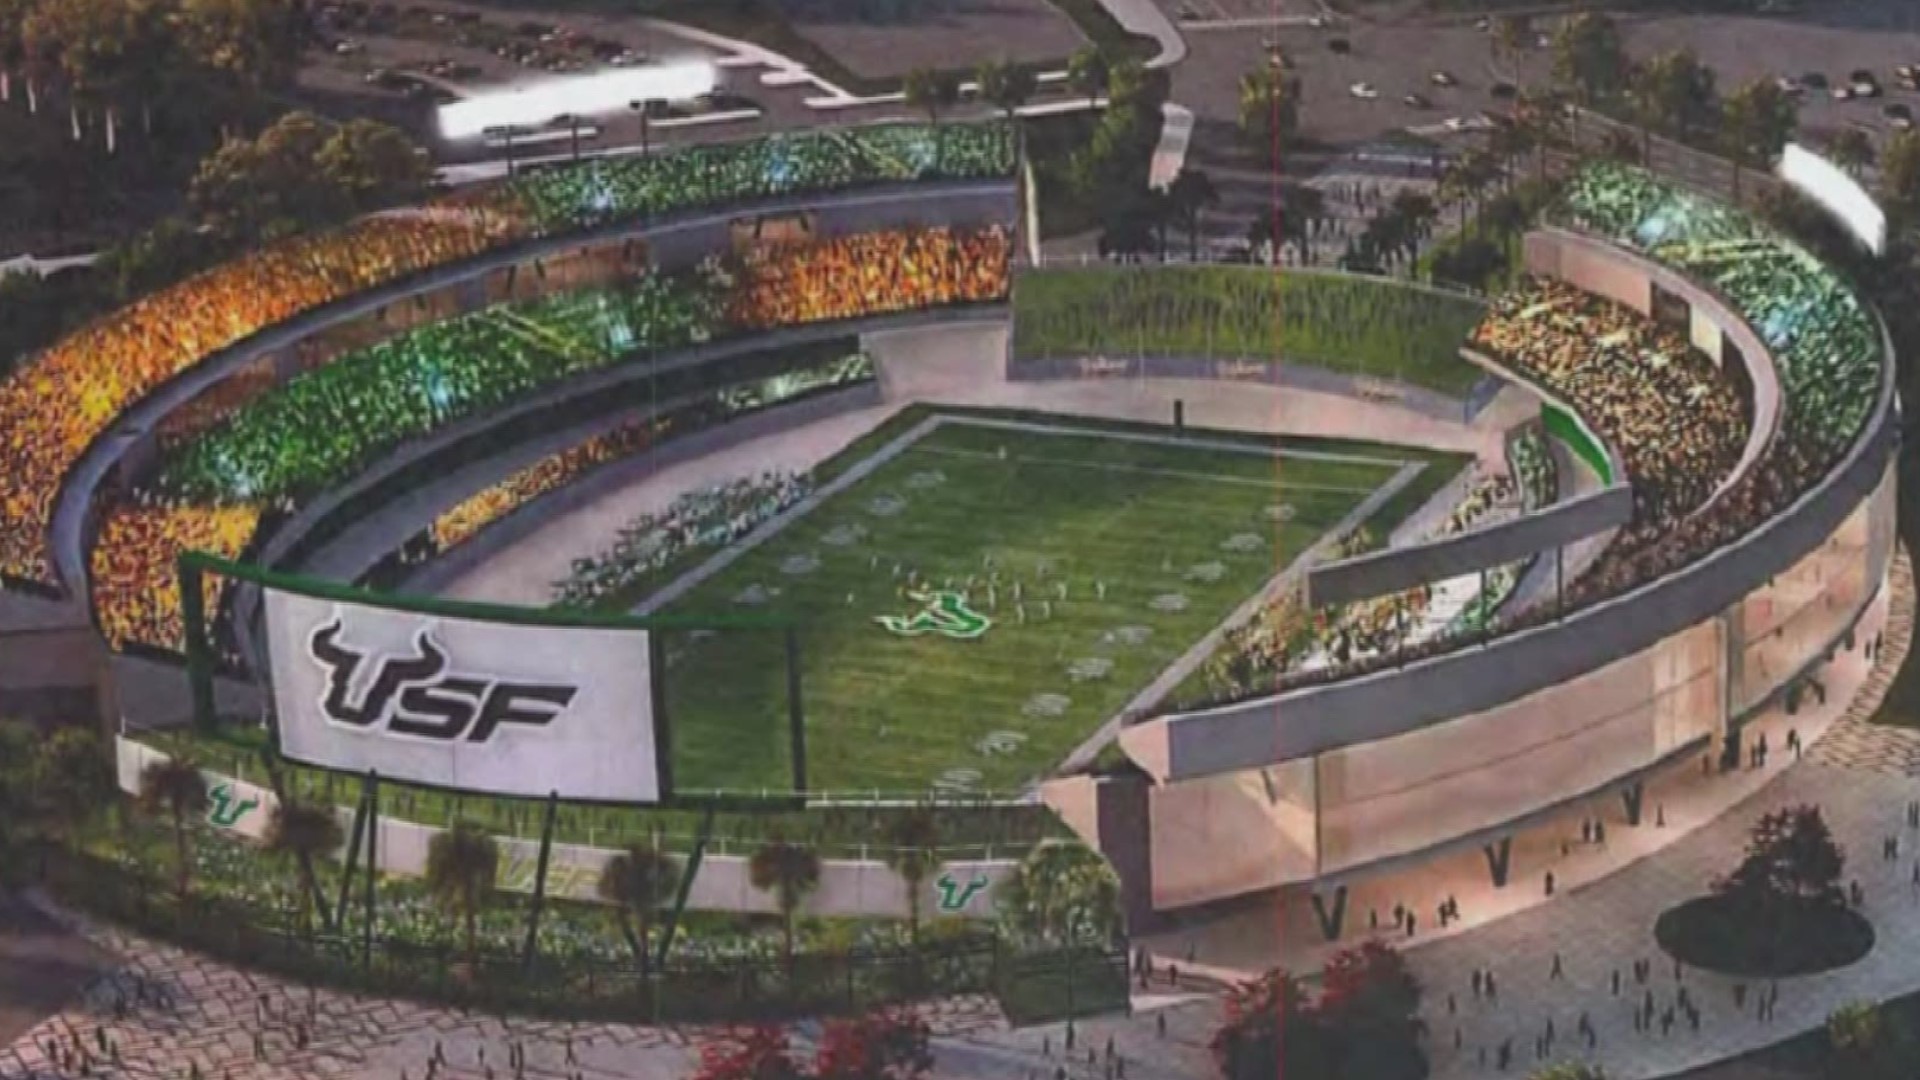 The Sycamore Fields site is under consideration, which board members say meets most criteria for a new stadium.